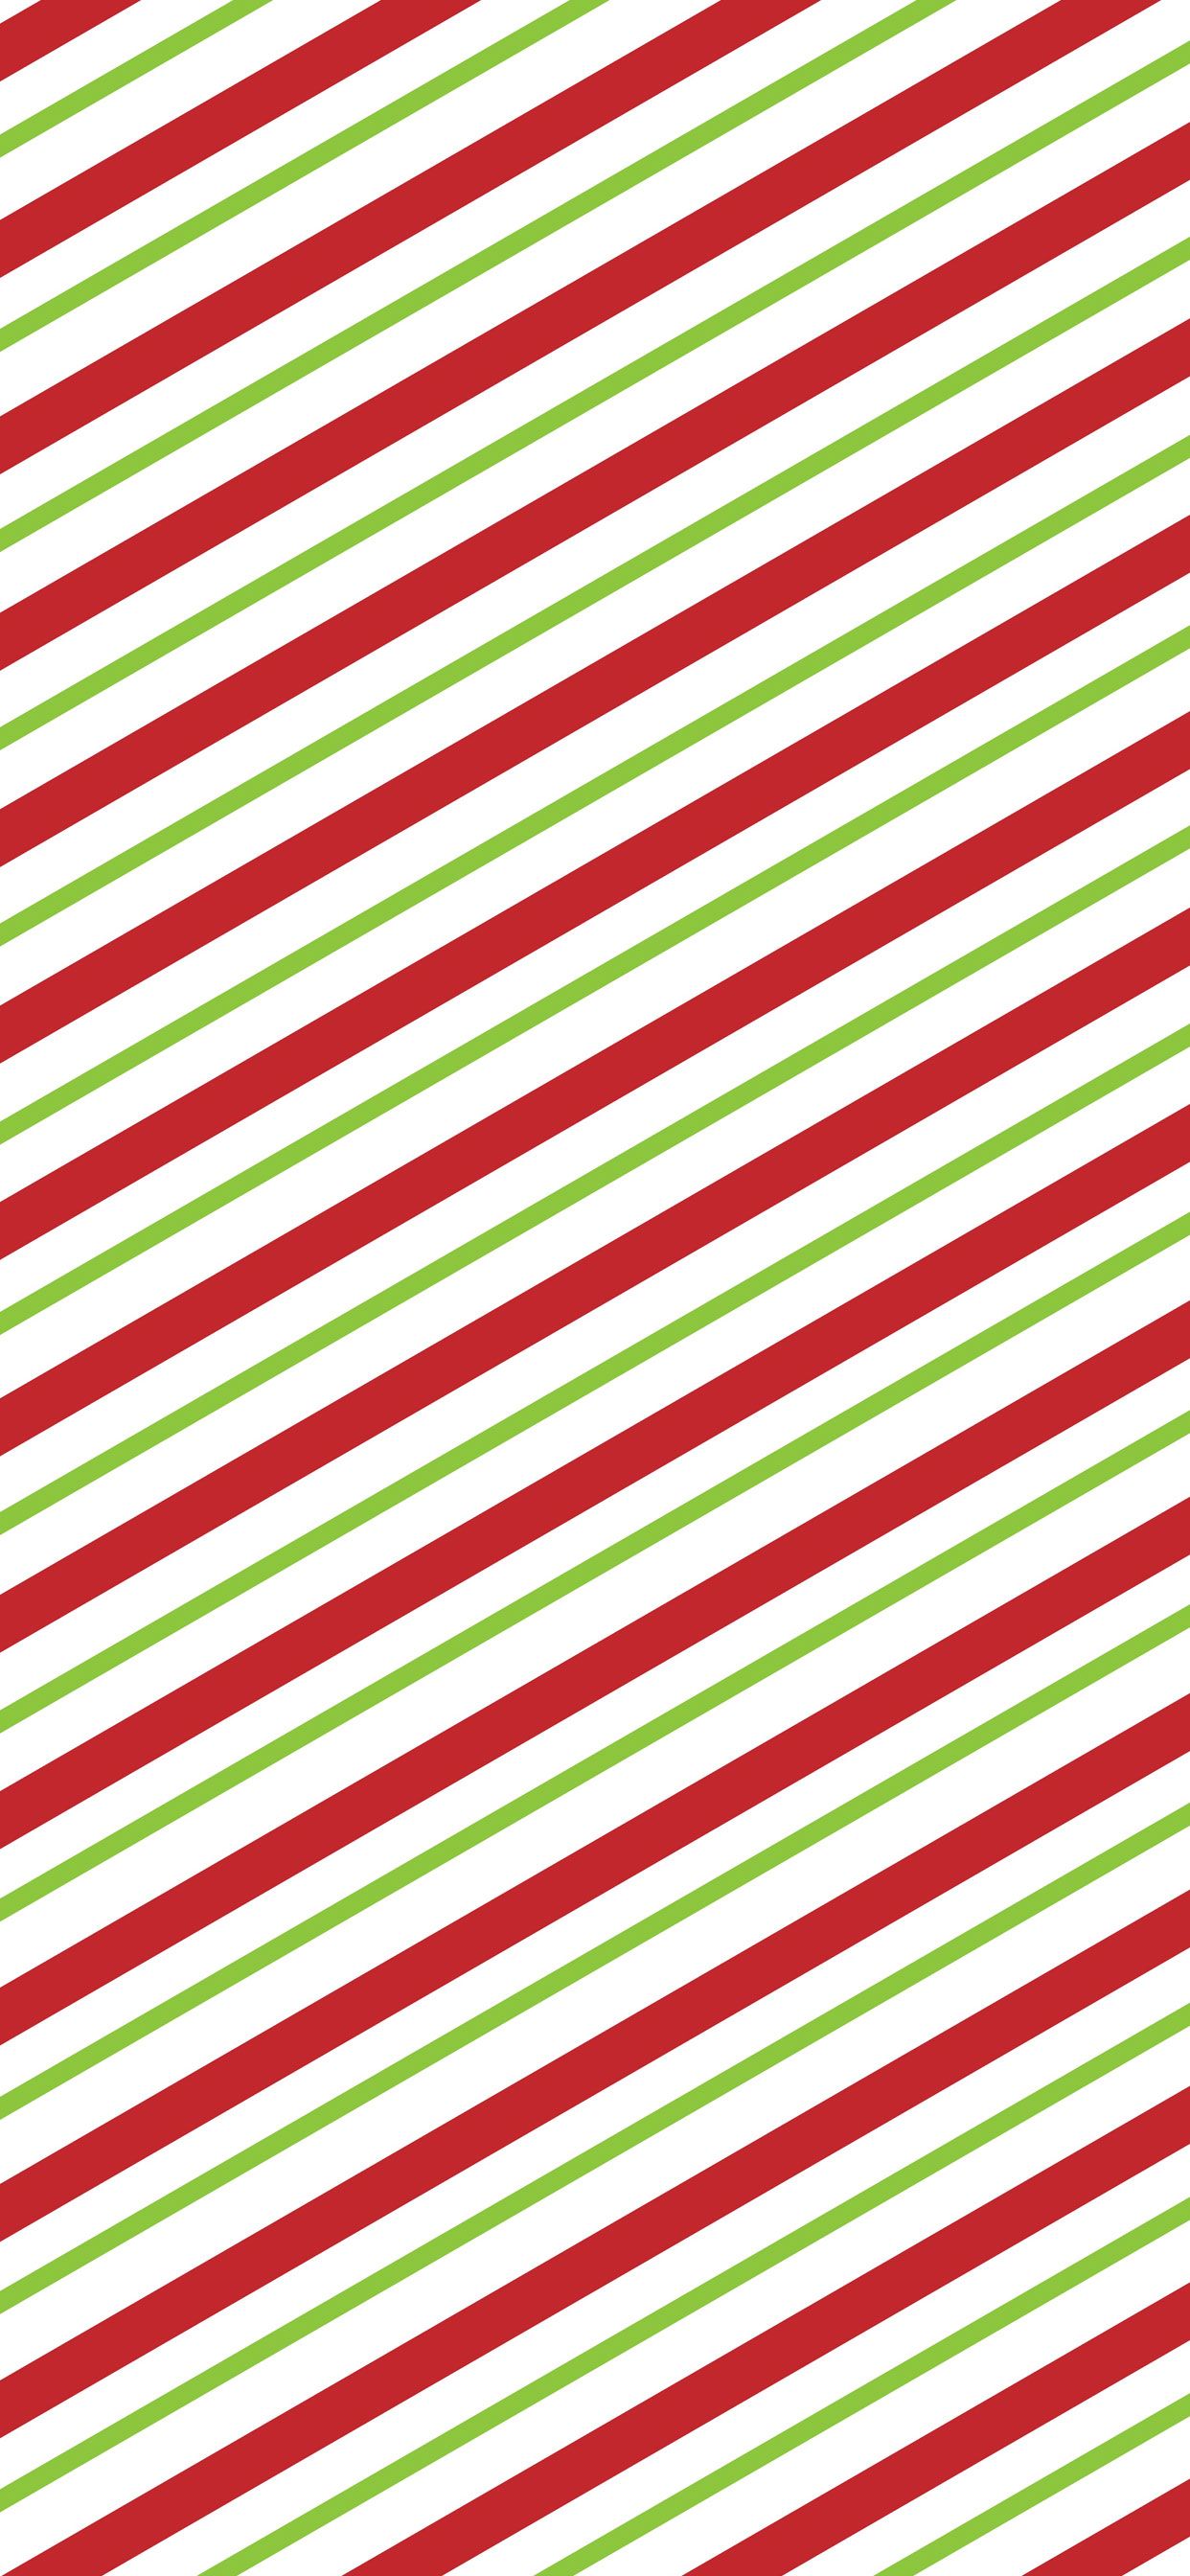 Red Green Christmas Images  Free Download on Freepik